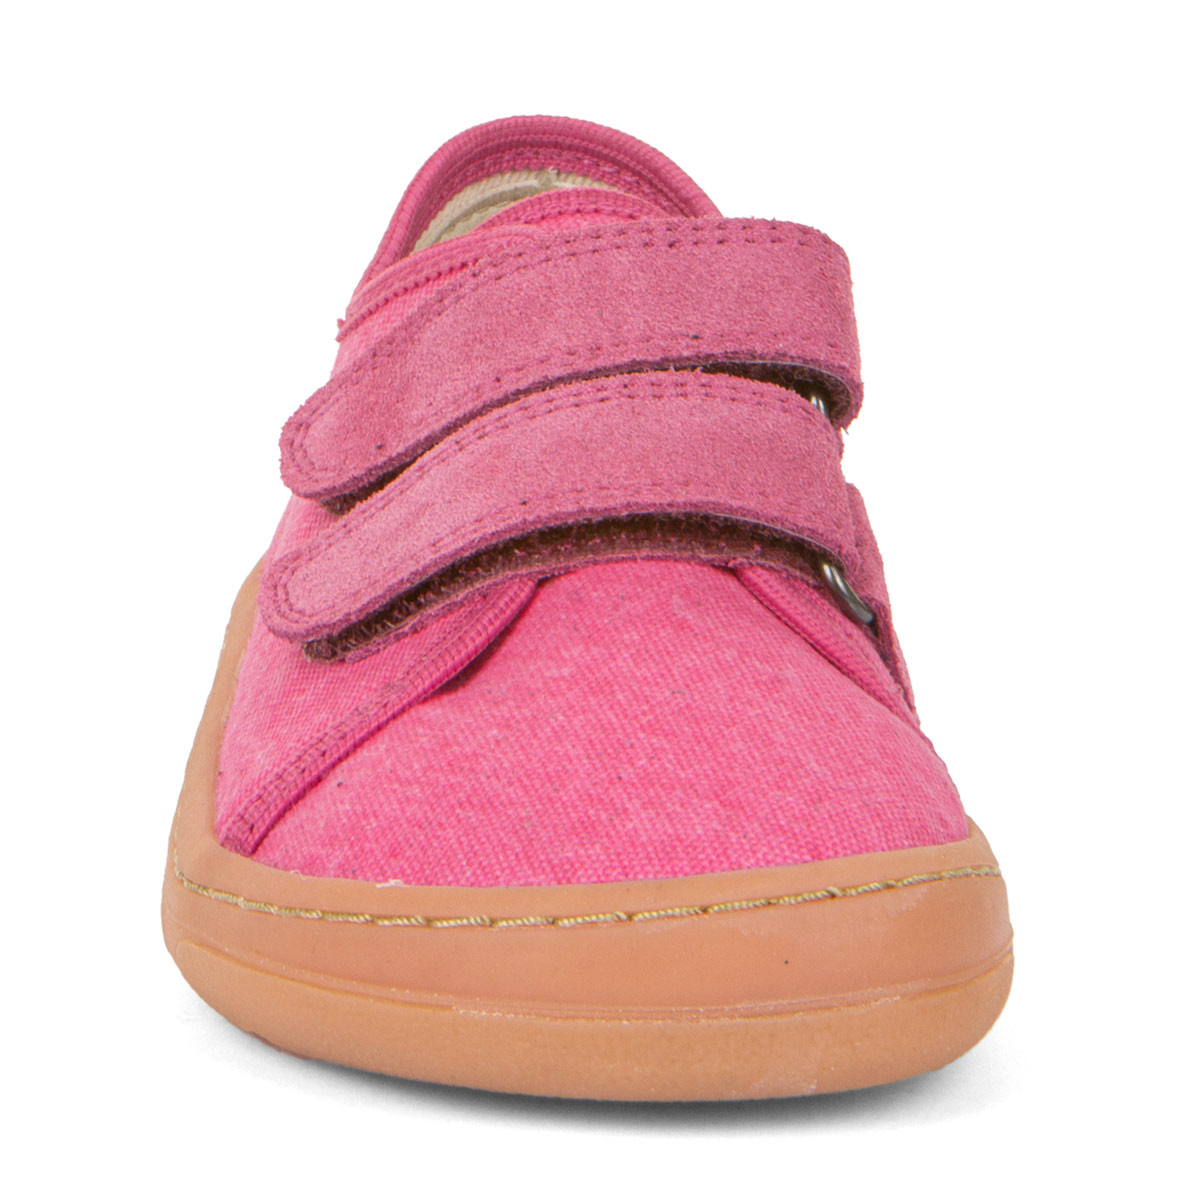 Barefoot Sneaker-Canvas fuxia